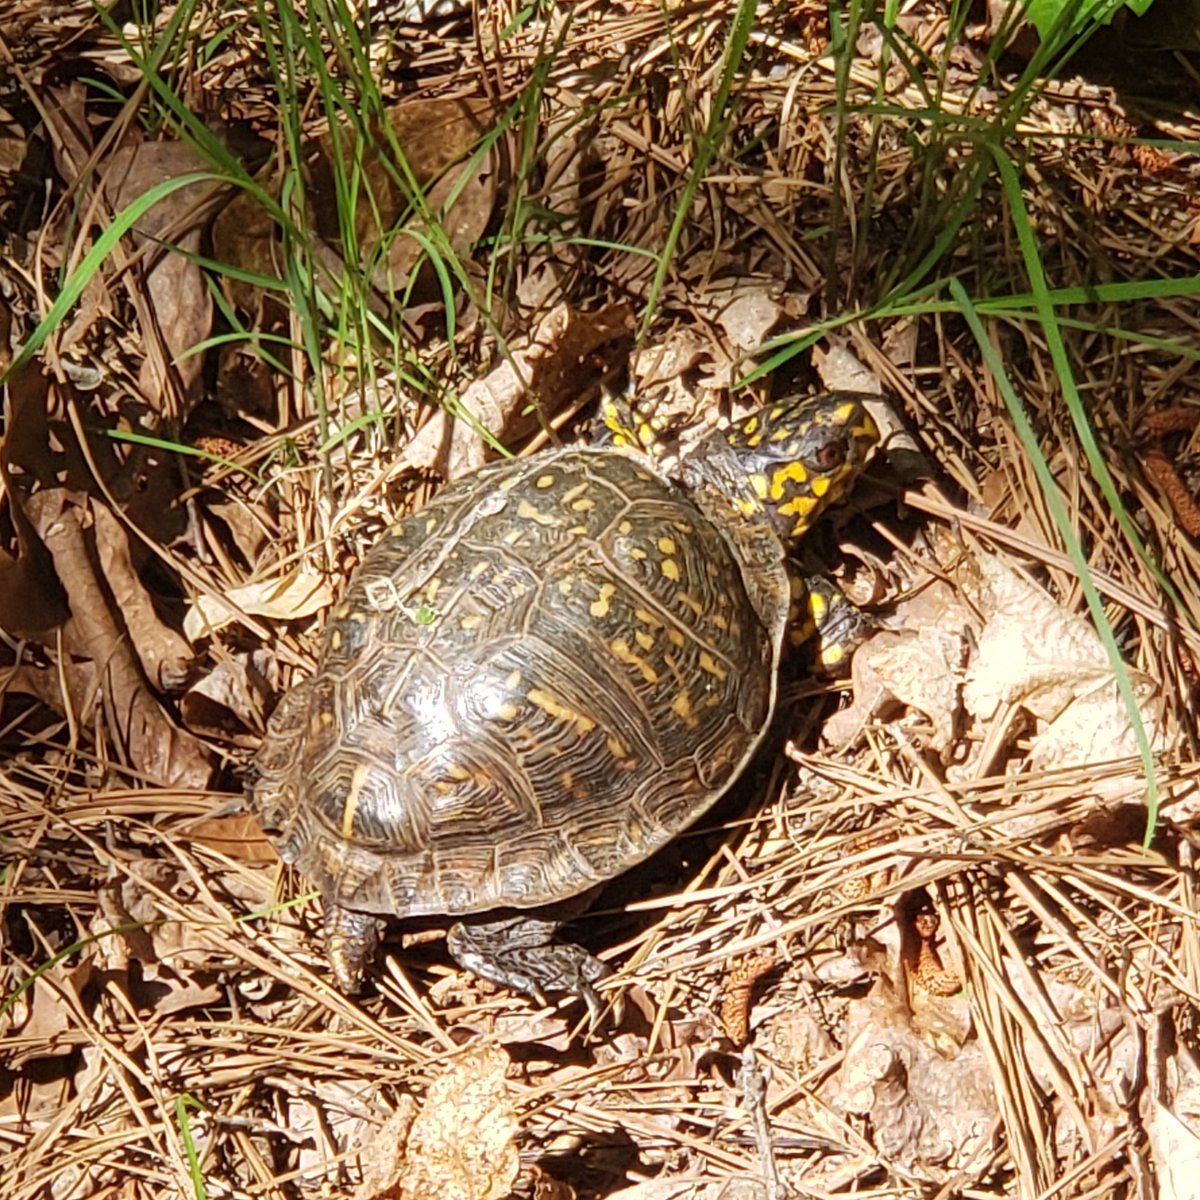 Apparently it's #worldturtleday2021 .
Encountered this Eastern Box Turtle on Friday while geologizing.